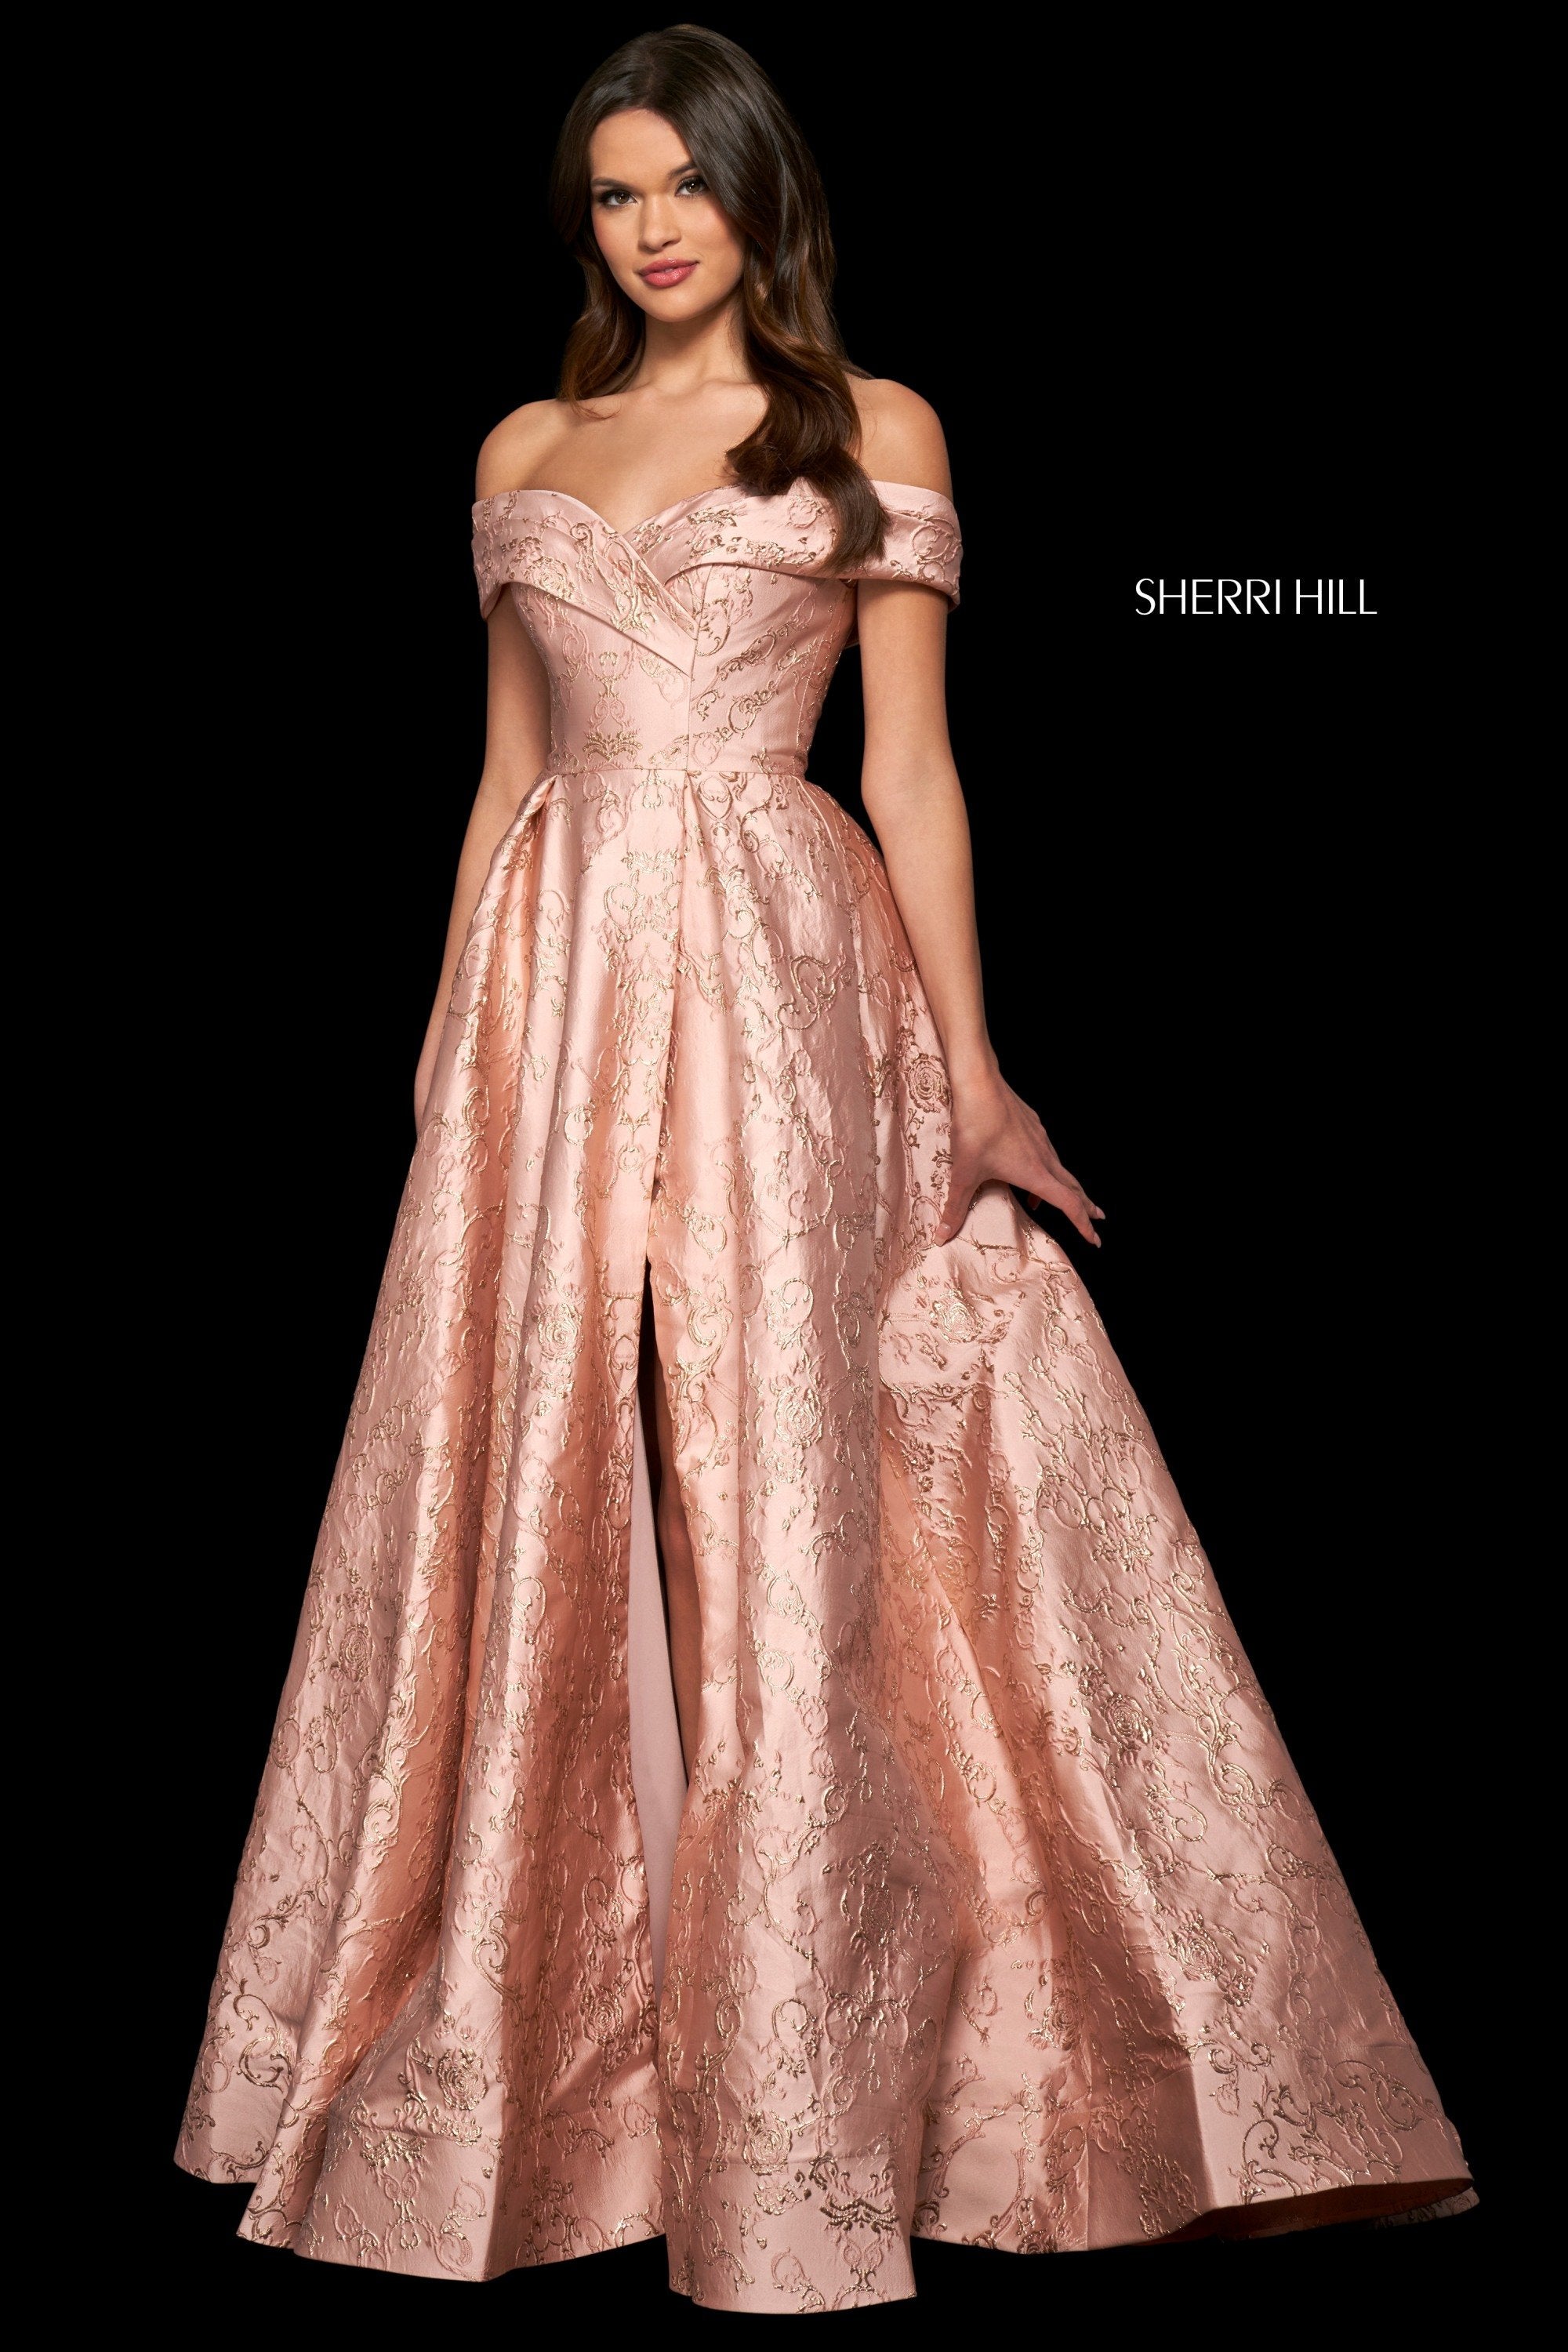 Sherri Hill 54024 dress images in these colors: Lilac, Light Blue, Rose, Ivory.